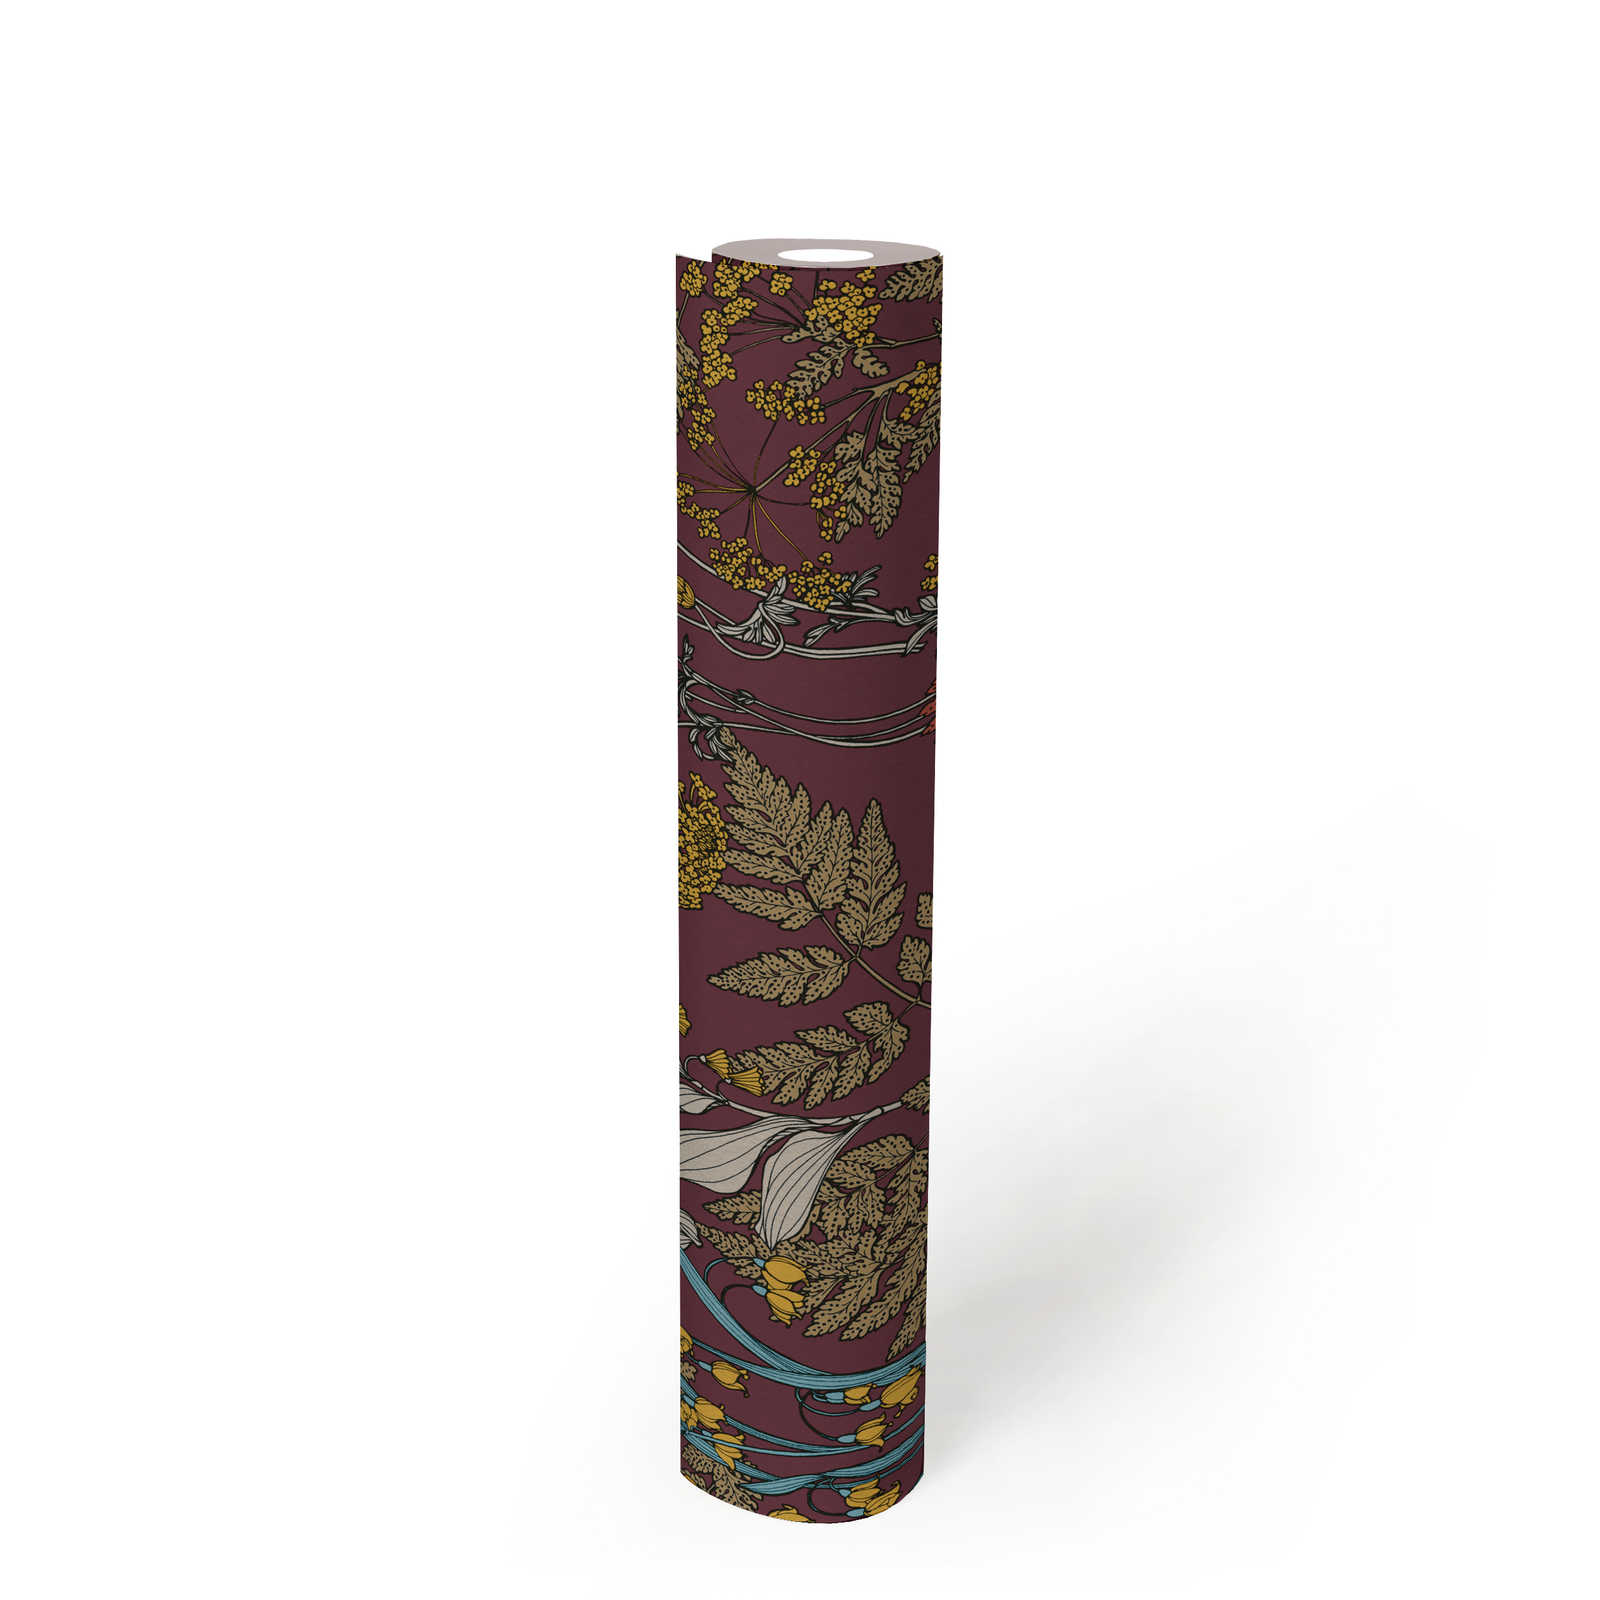             Purple wallpaper with colourful leaves & flowers design - red, yellow, blue
        